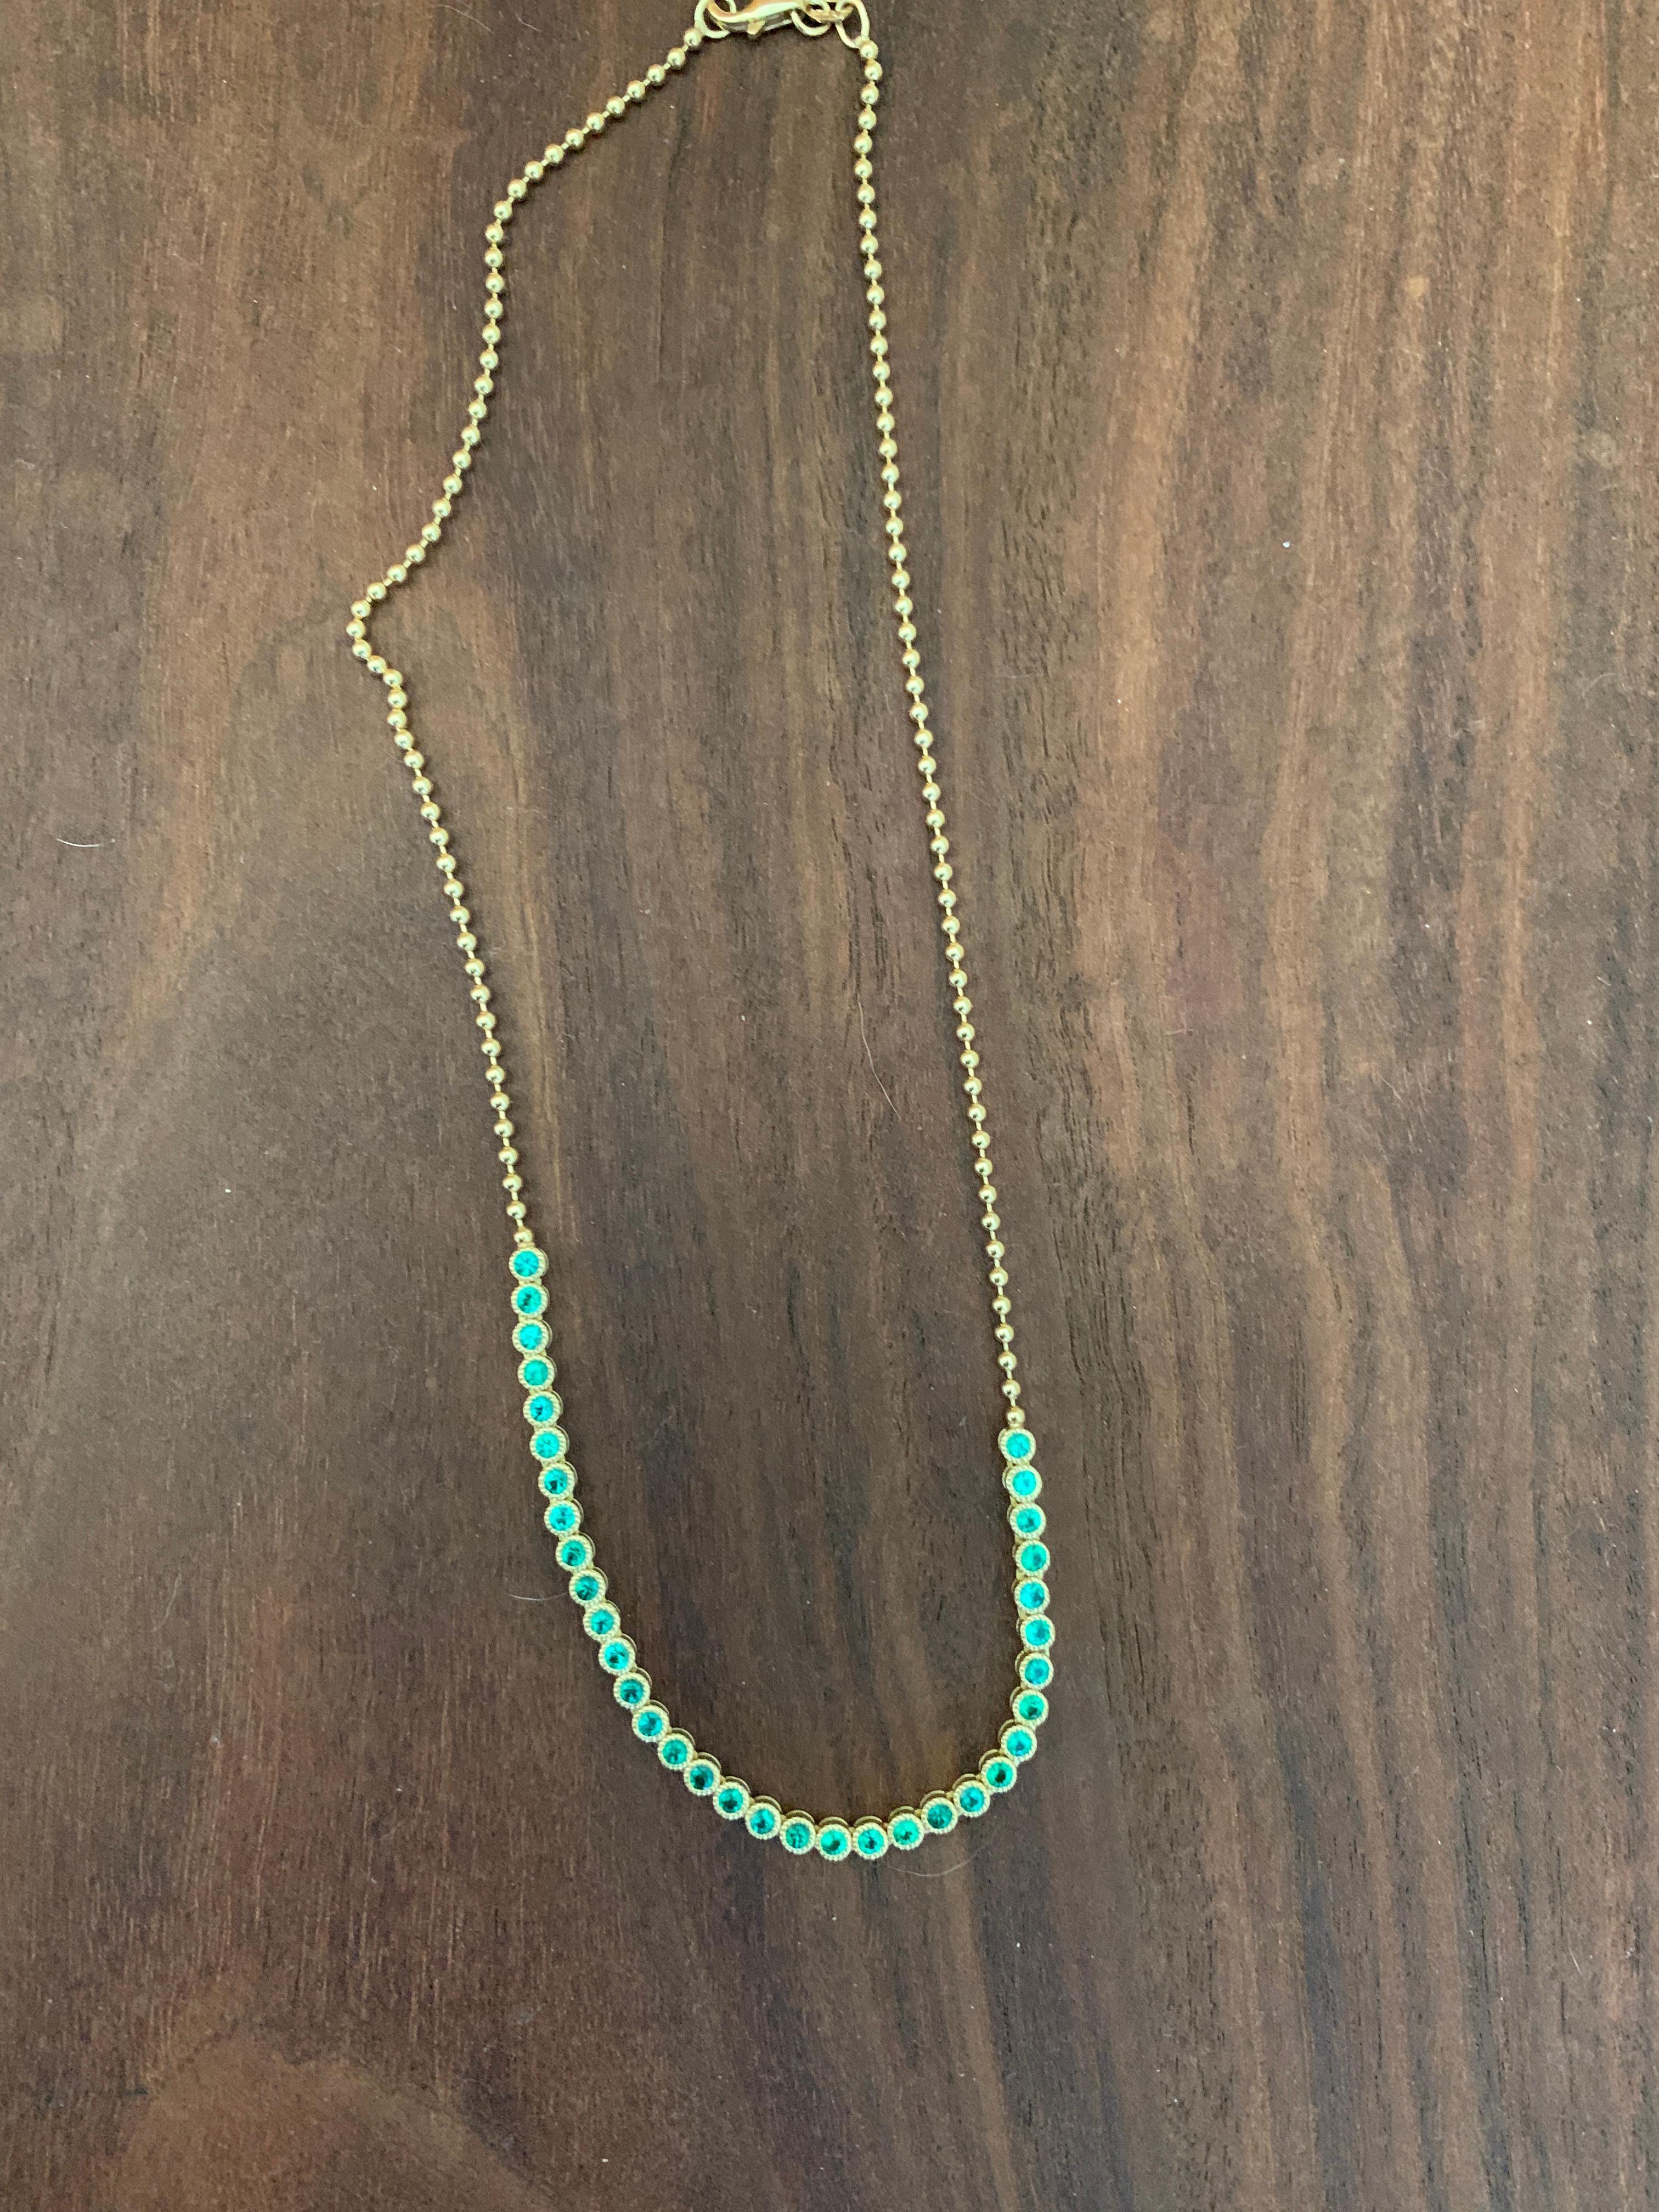 An Emerald Necklace on an 18 Karat Gold Chain. This Necklace is handcrafted in 18-Karat Solid Yellow Gold and is detailed in 34 Emeralds.  Emerald total  Carat weight is 1.60.  This Necklace measures 16.5-in. long and is finished with a lobster